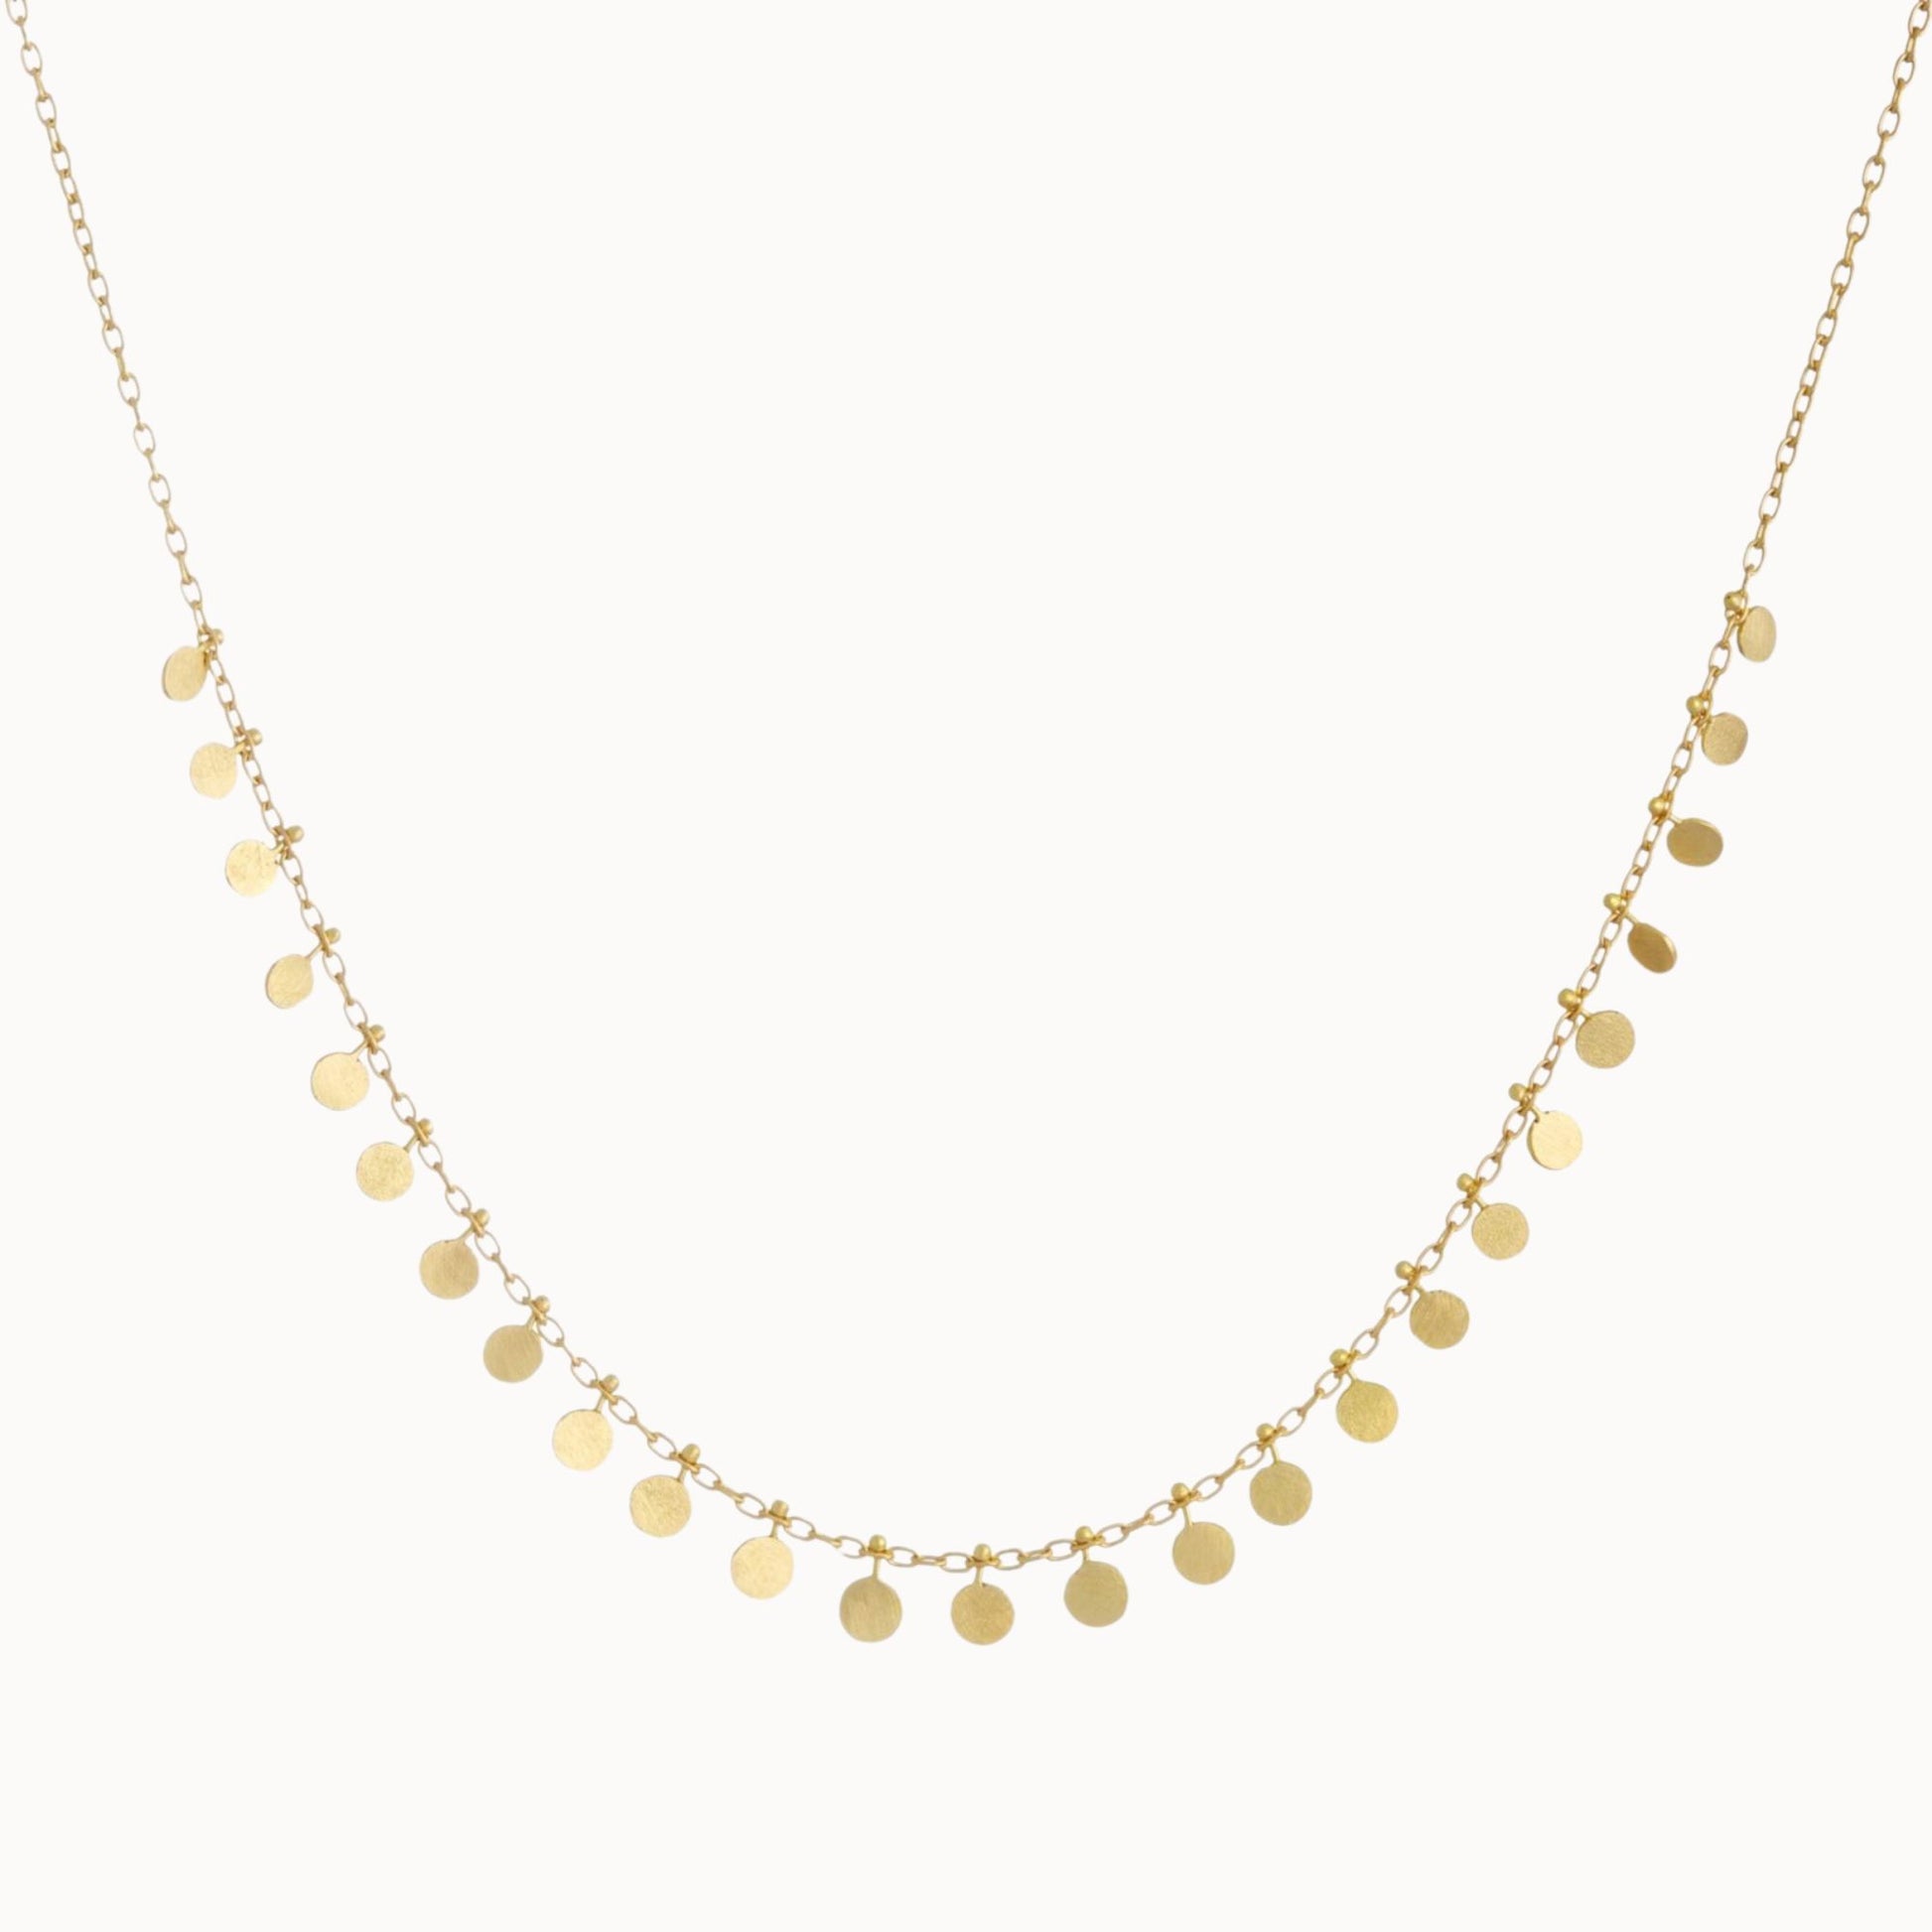 Sia Taylor 18K Medium Dots Necklace-Sia Taylor-Thistle Hill